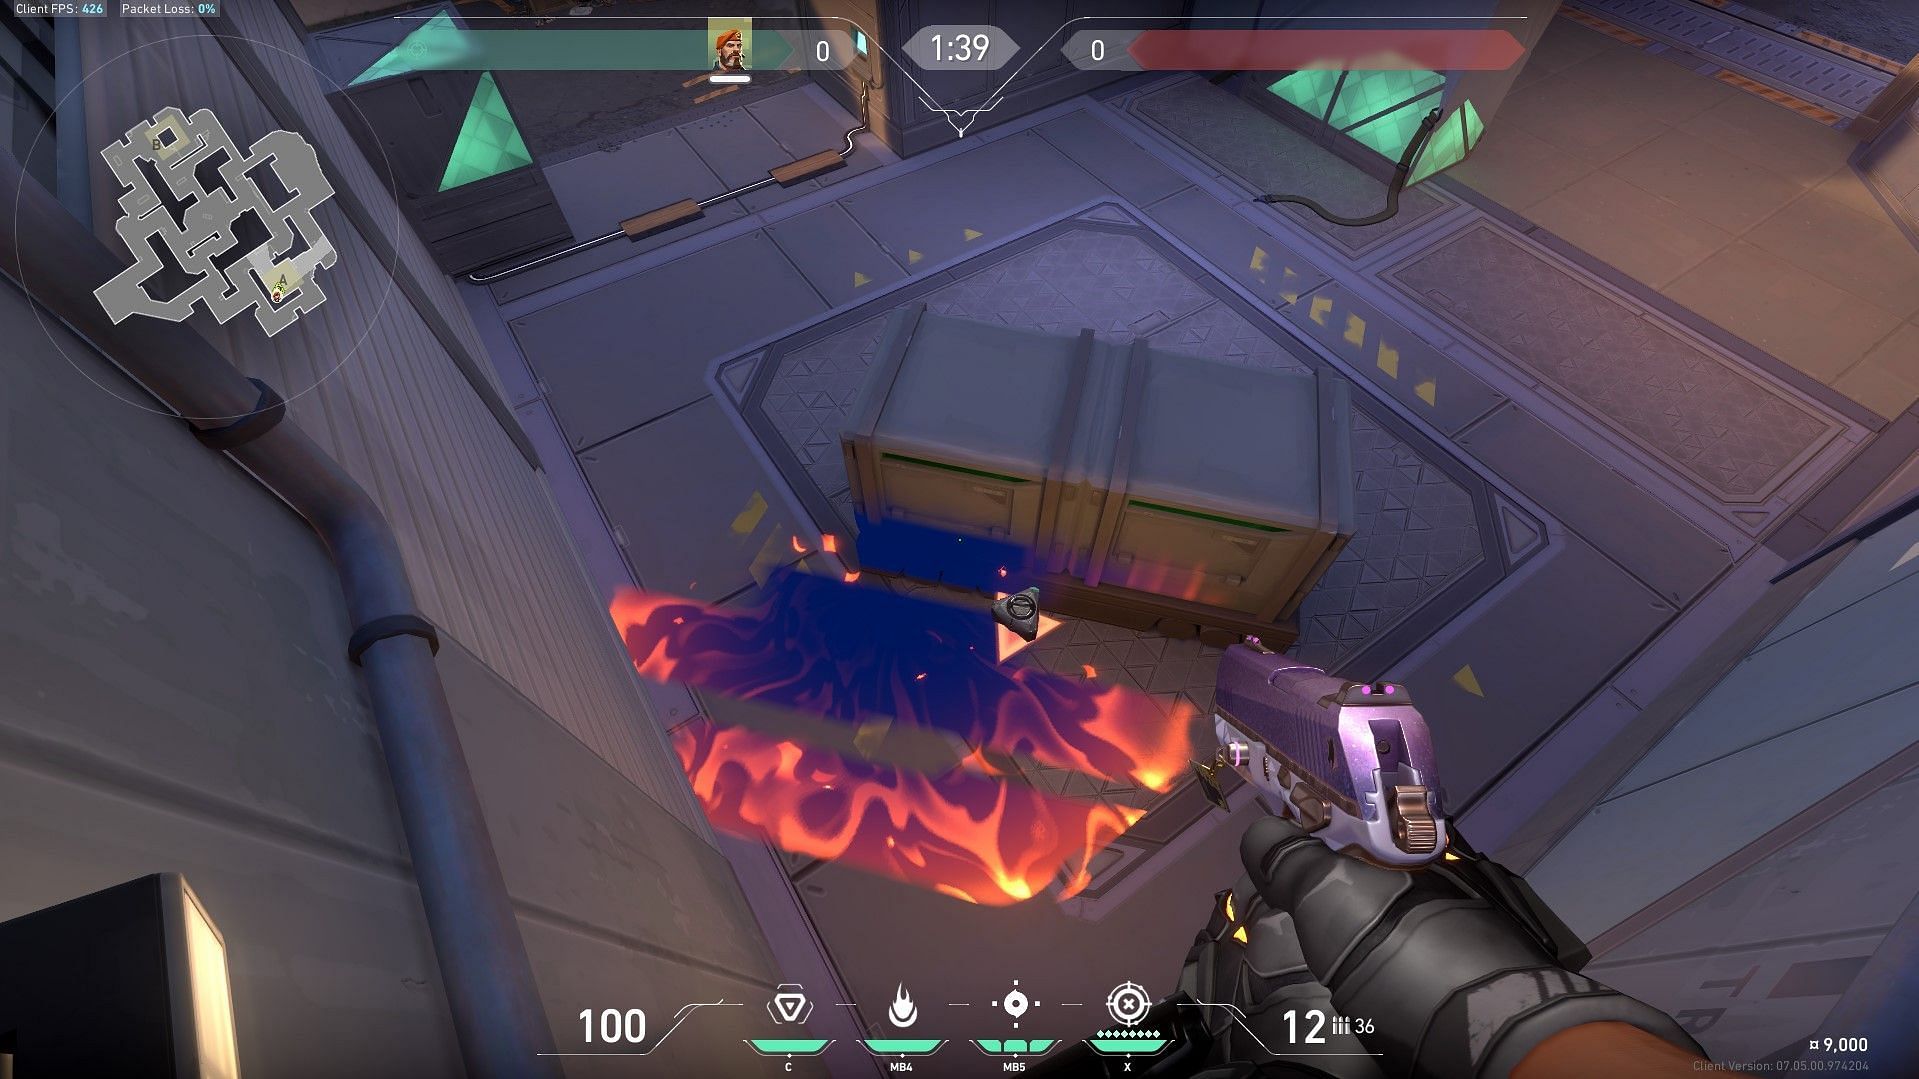 Where the Incendiary lands in A Site behind the box plant (Image via Riot Games)